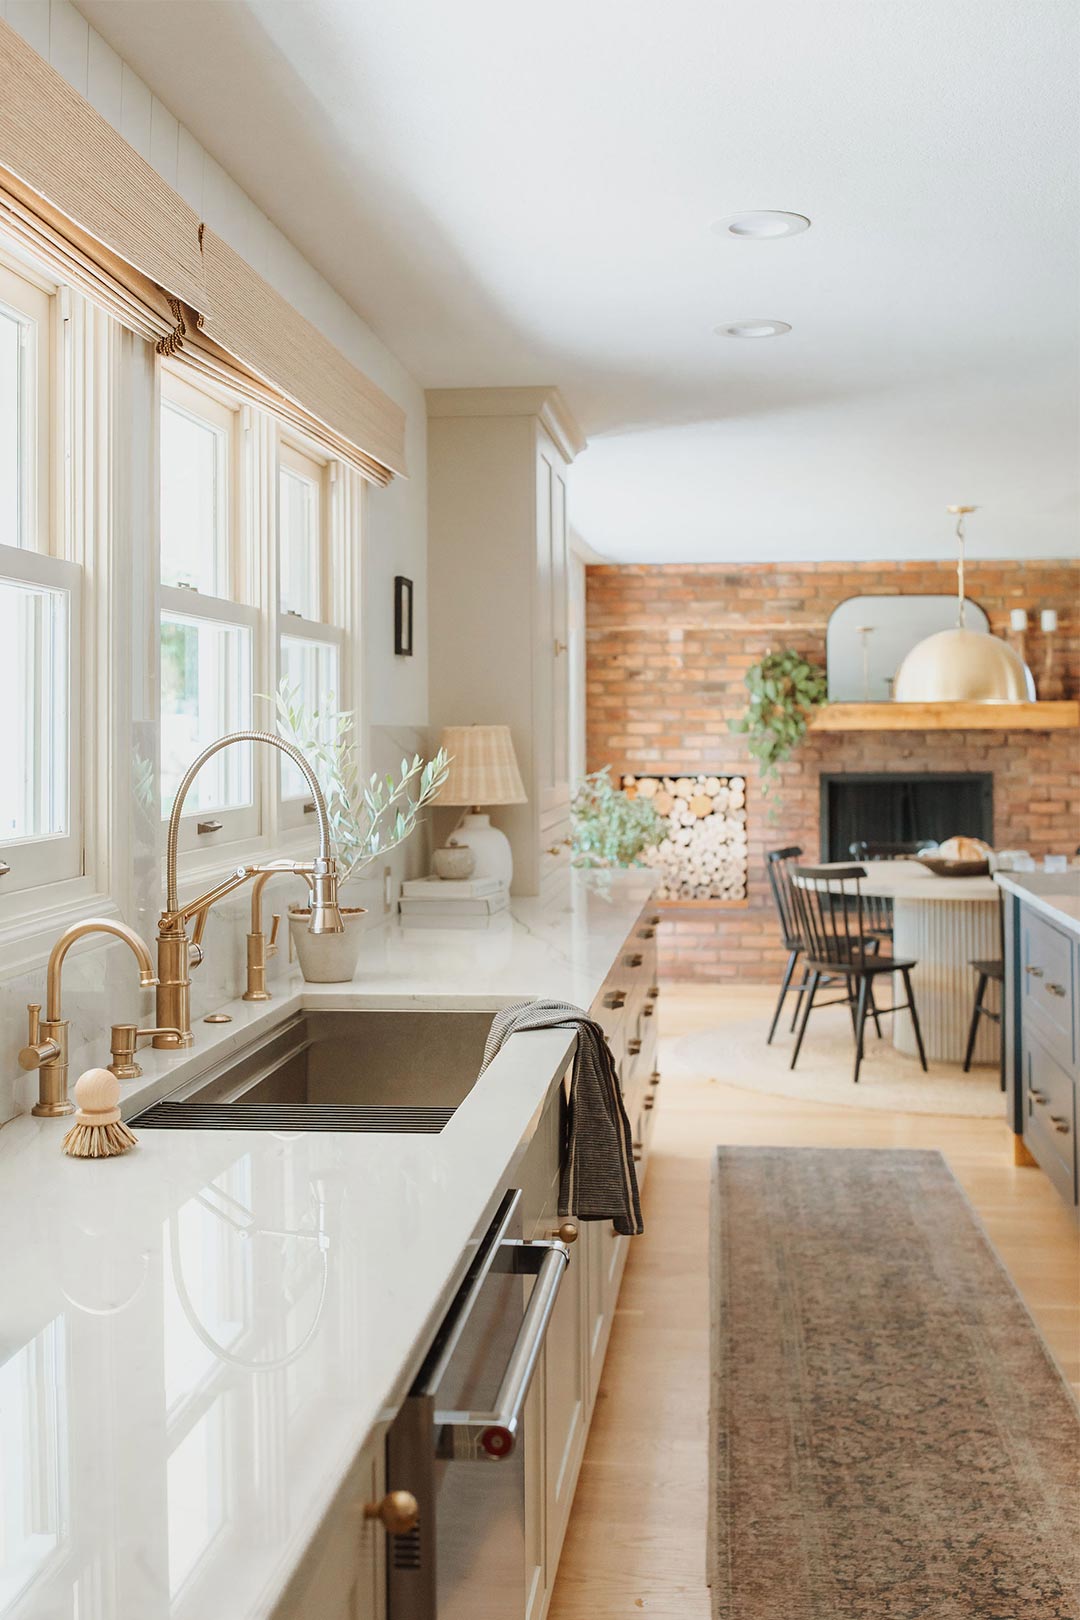 Bright and airy modern eclectic farmhouse kitchen in Golden Colorado with brass hardware, bar seating and a dining nook.